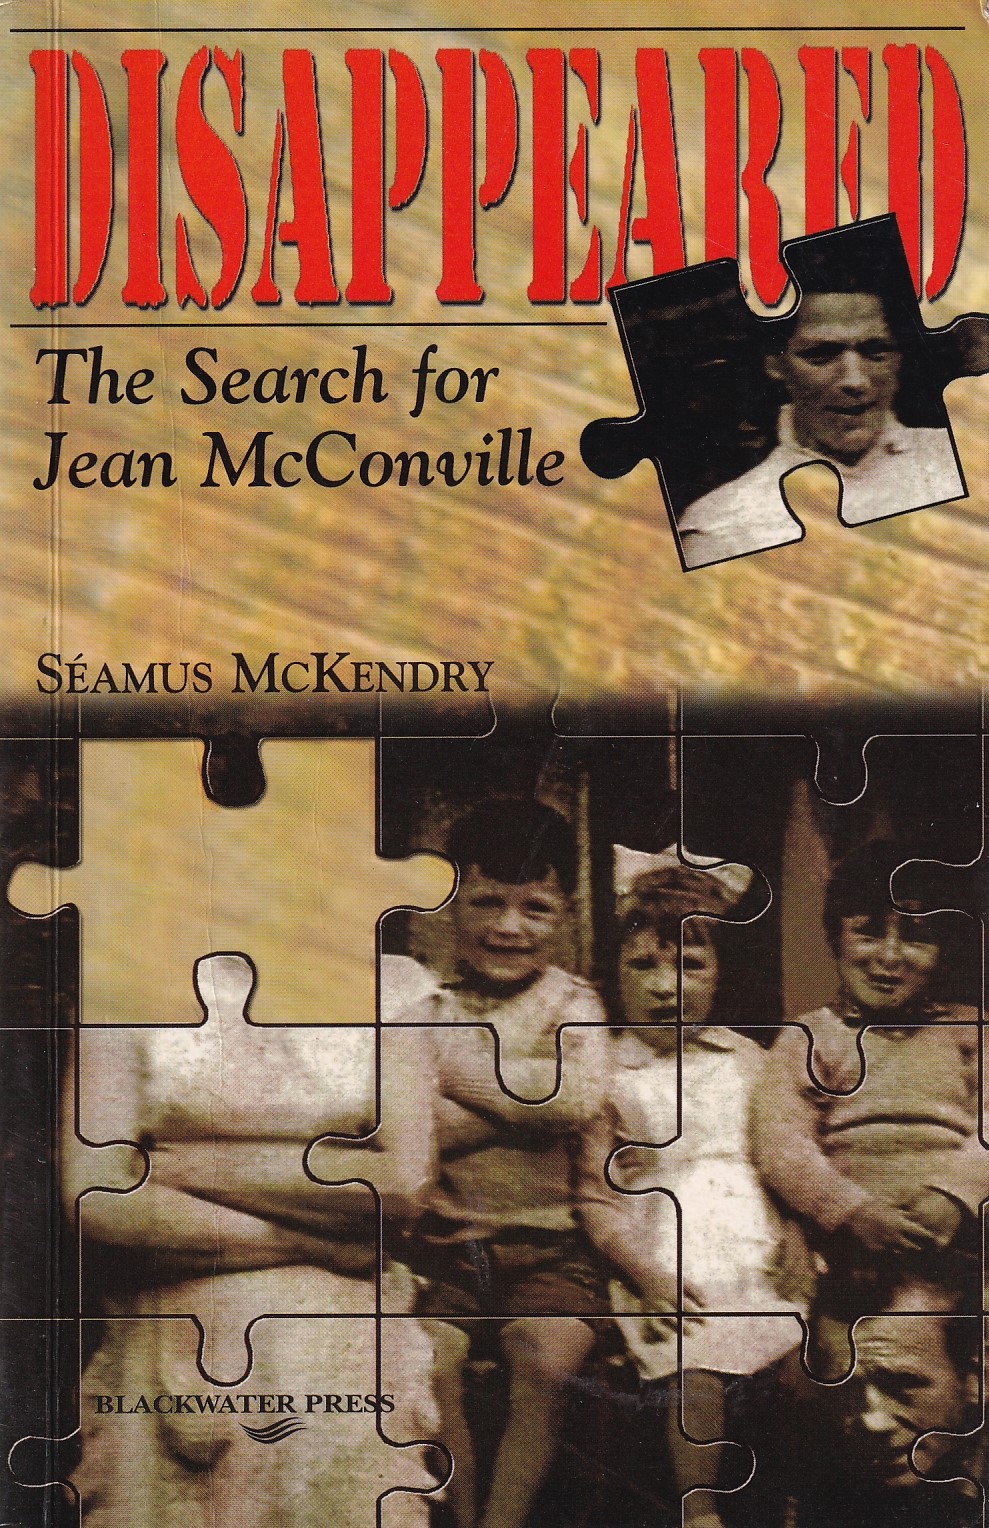 Disappeared: The search for Jean McConville by Séamus McKendry